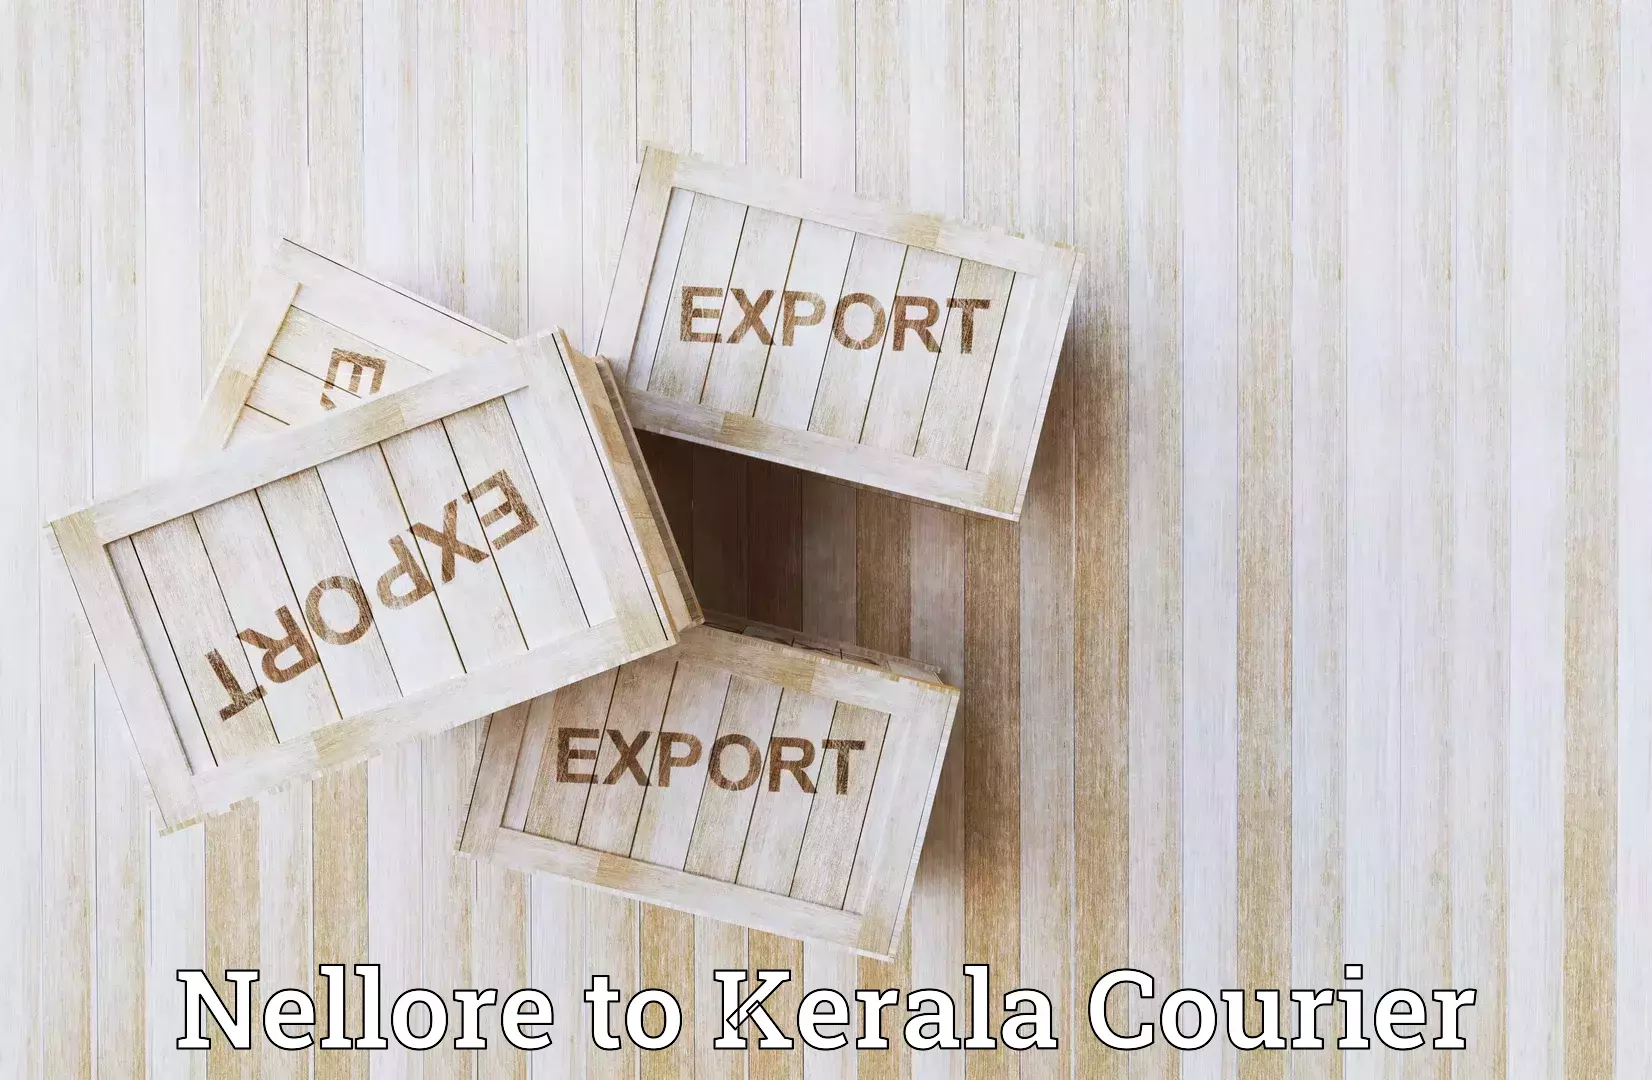 Full-service courier options Nellore to Kerala